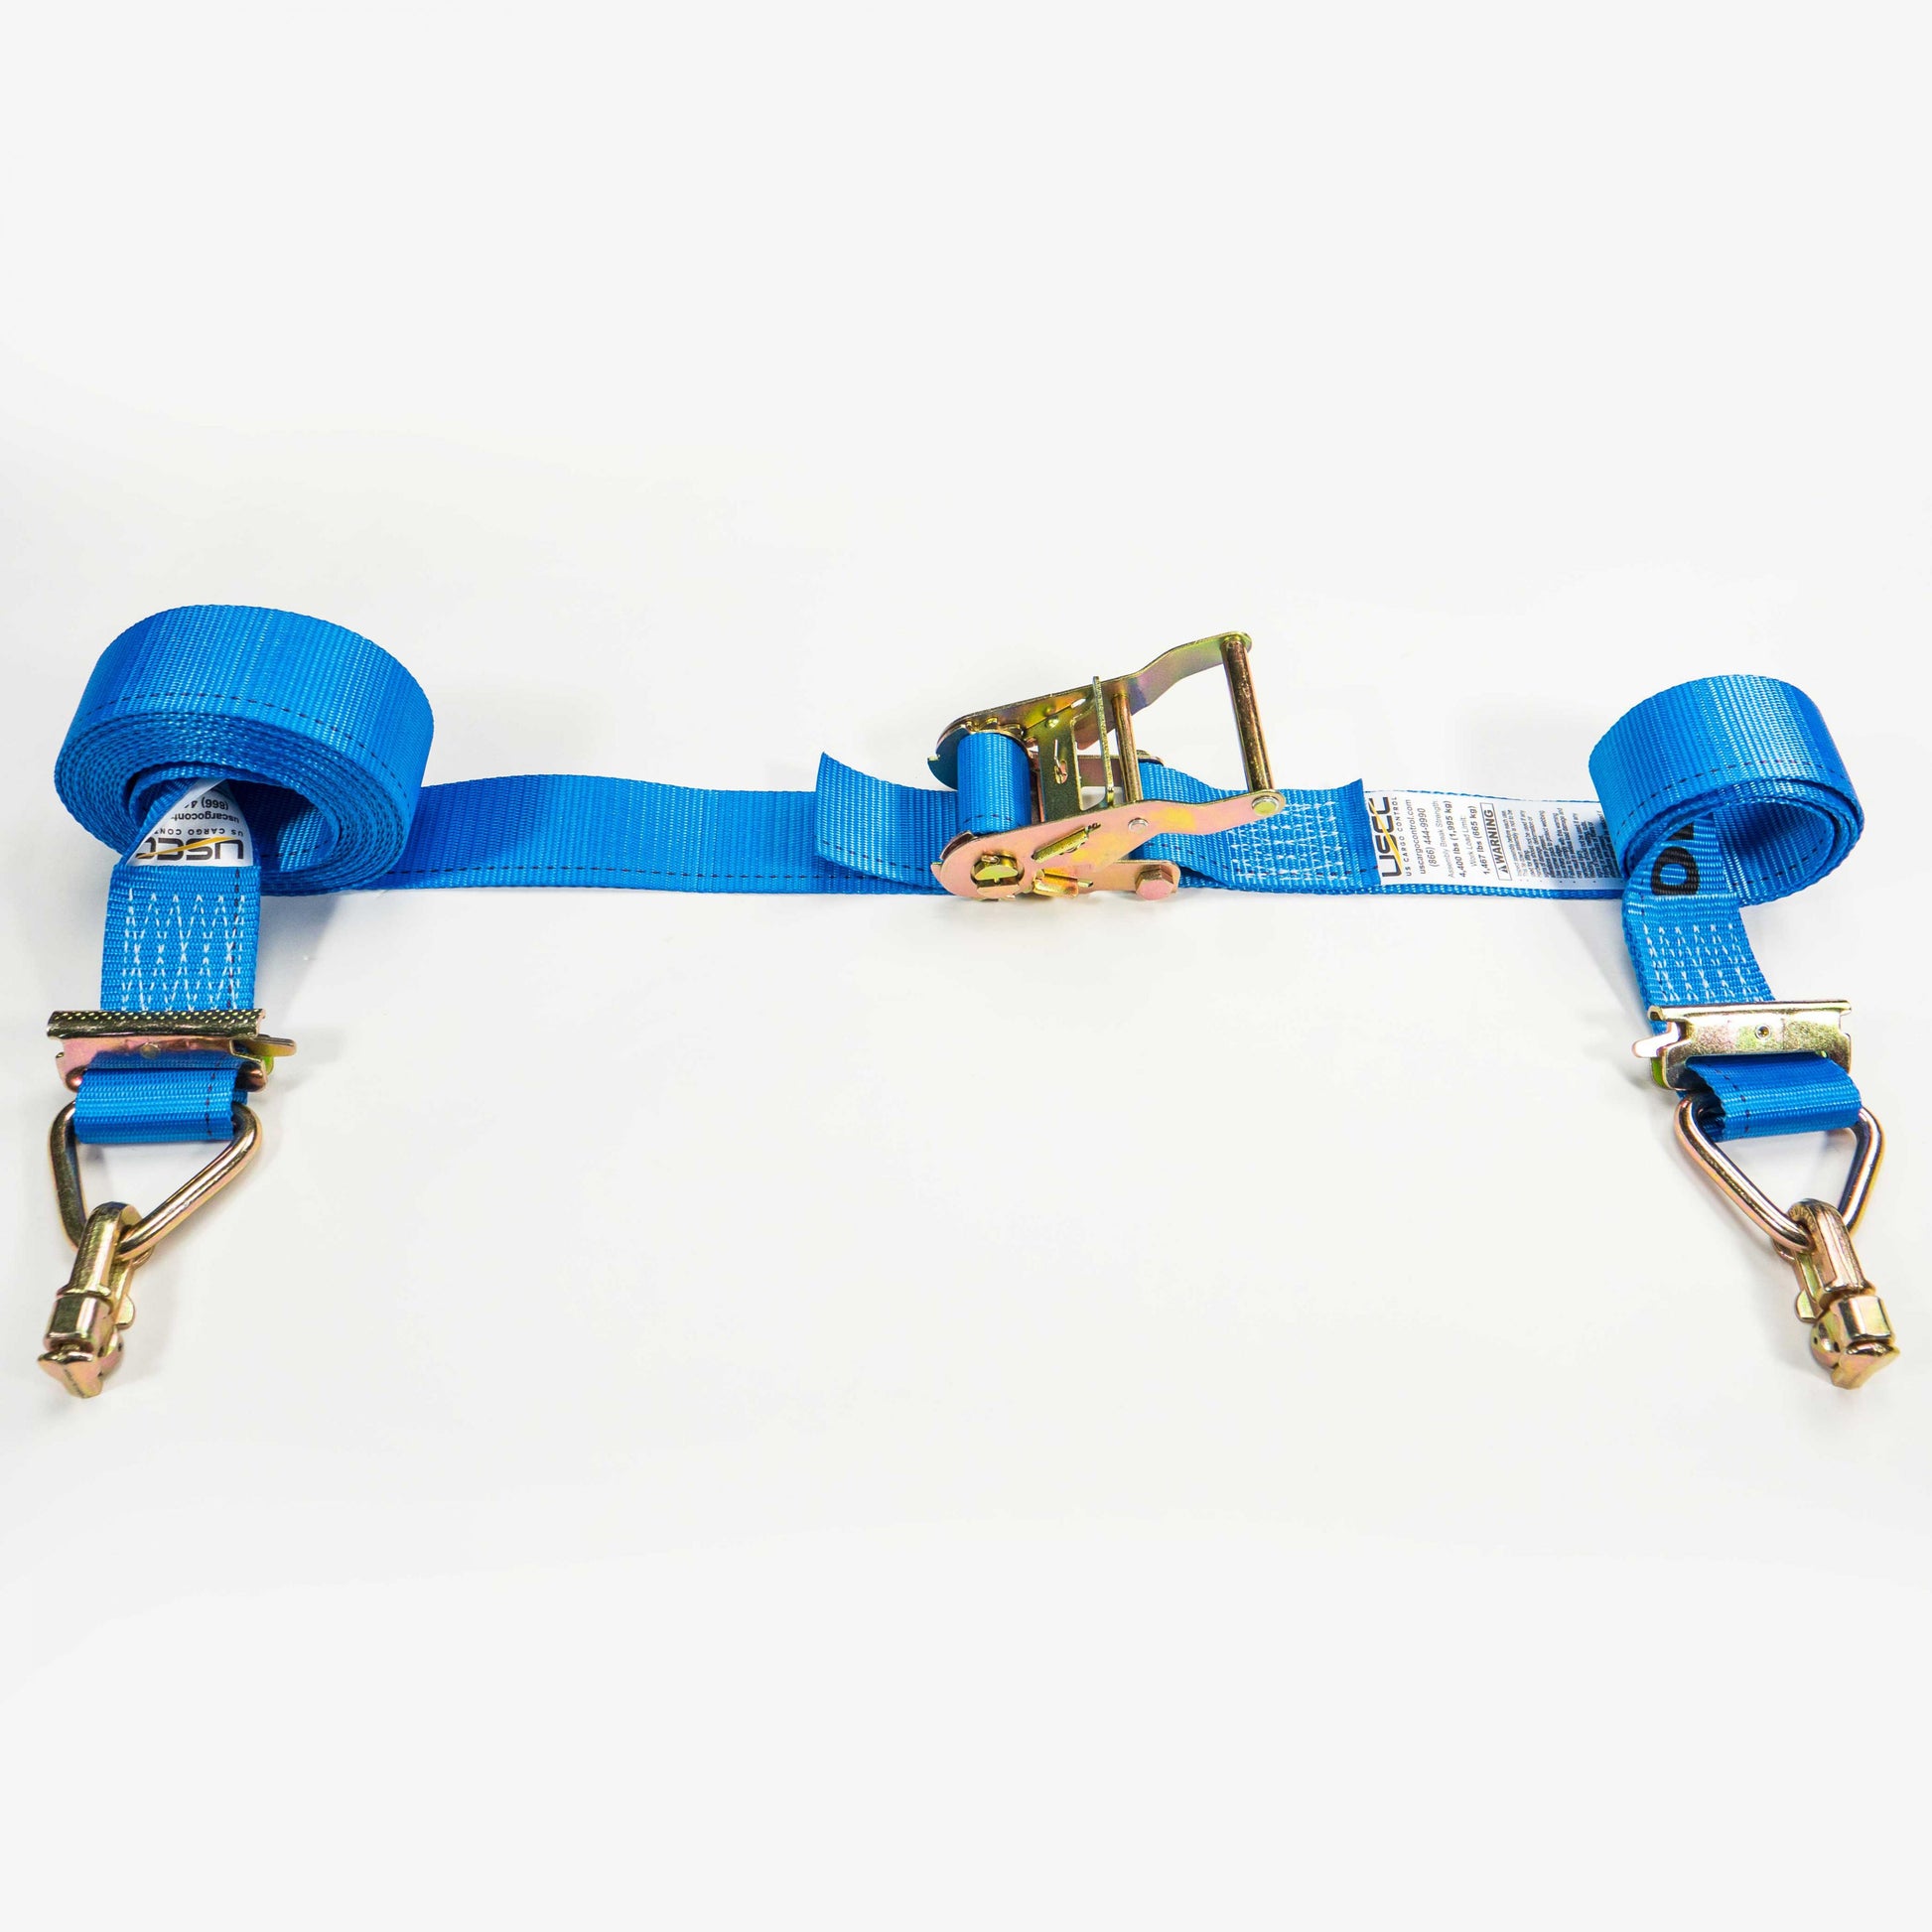 2 inch x 20 foot Blue E Track Ratchet Straps w Double Stud Fittings image 2 of 9